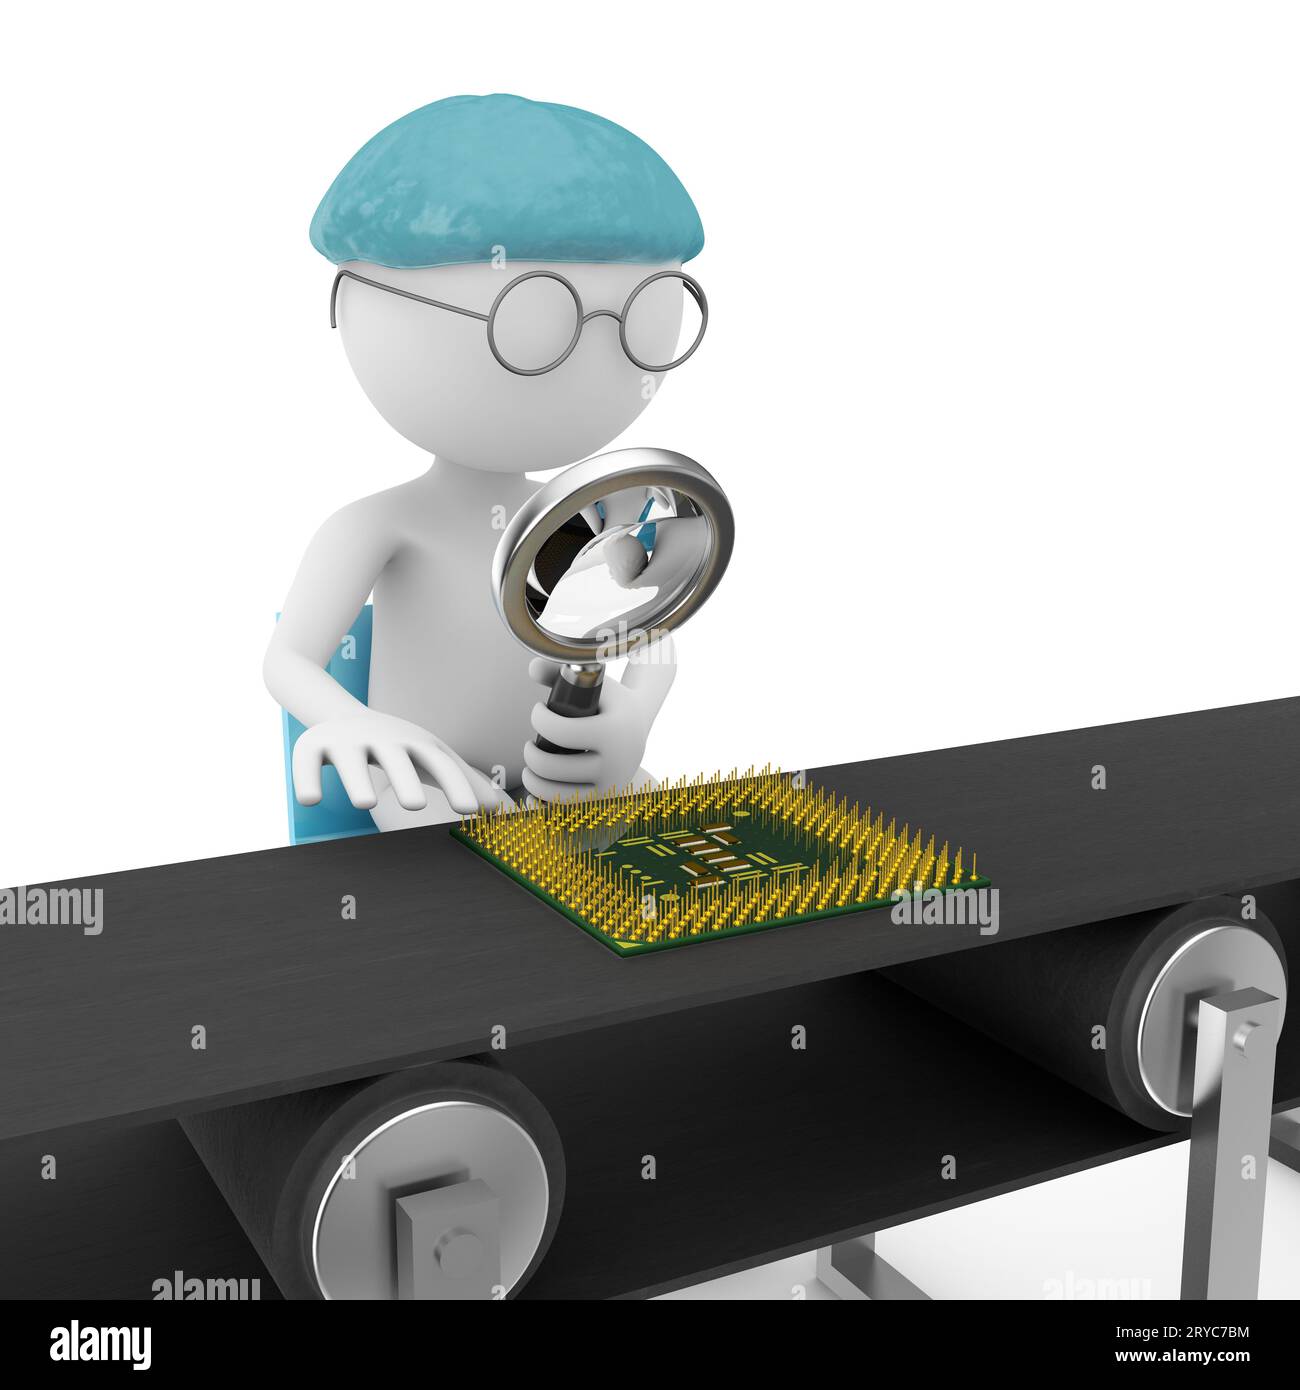 Chip on the assembly line Stock Photo